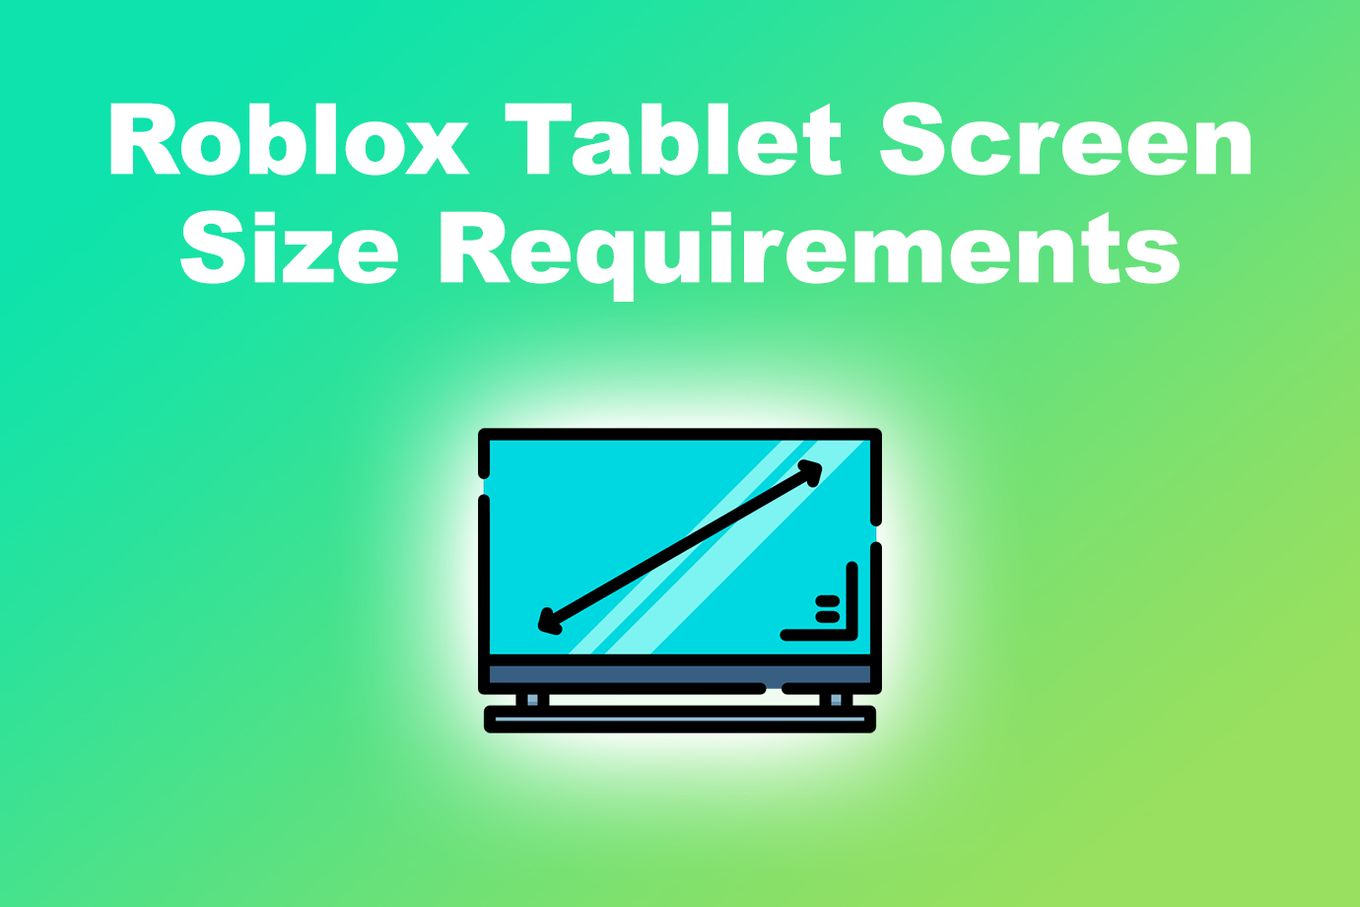 Roblox Tablet Screen Size Requirements